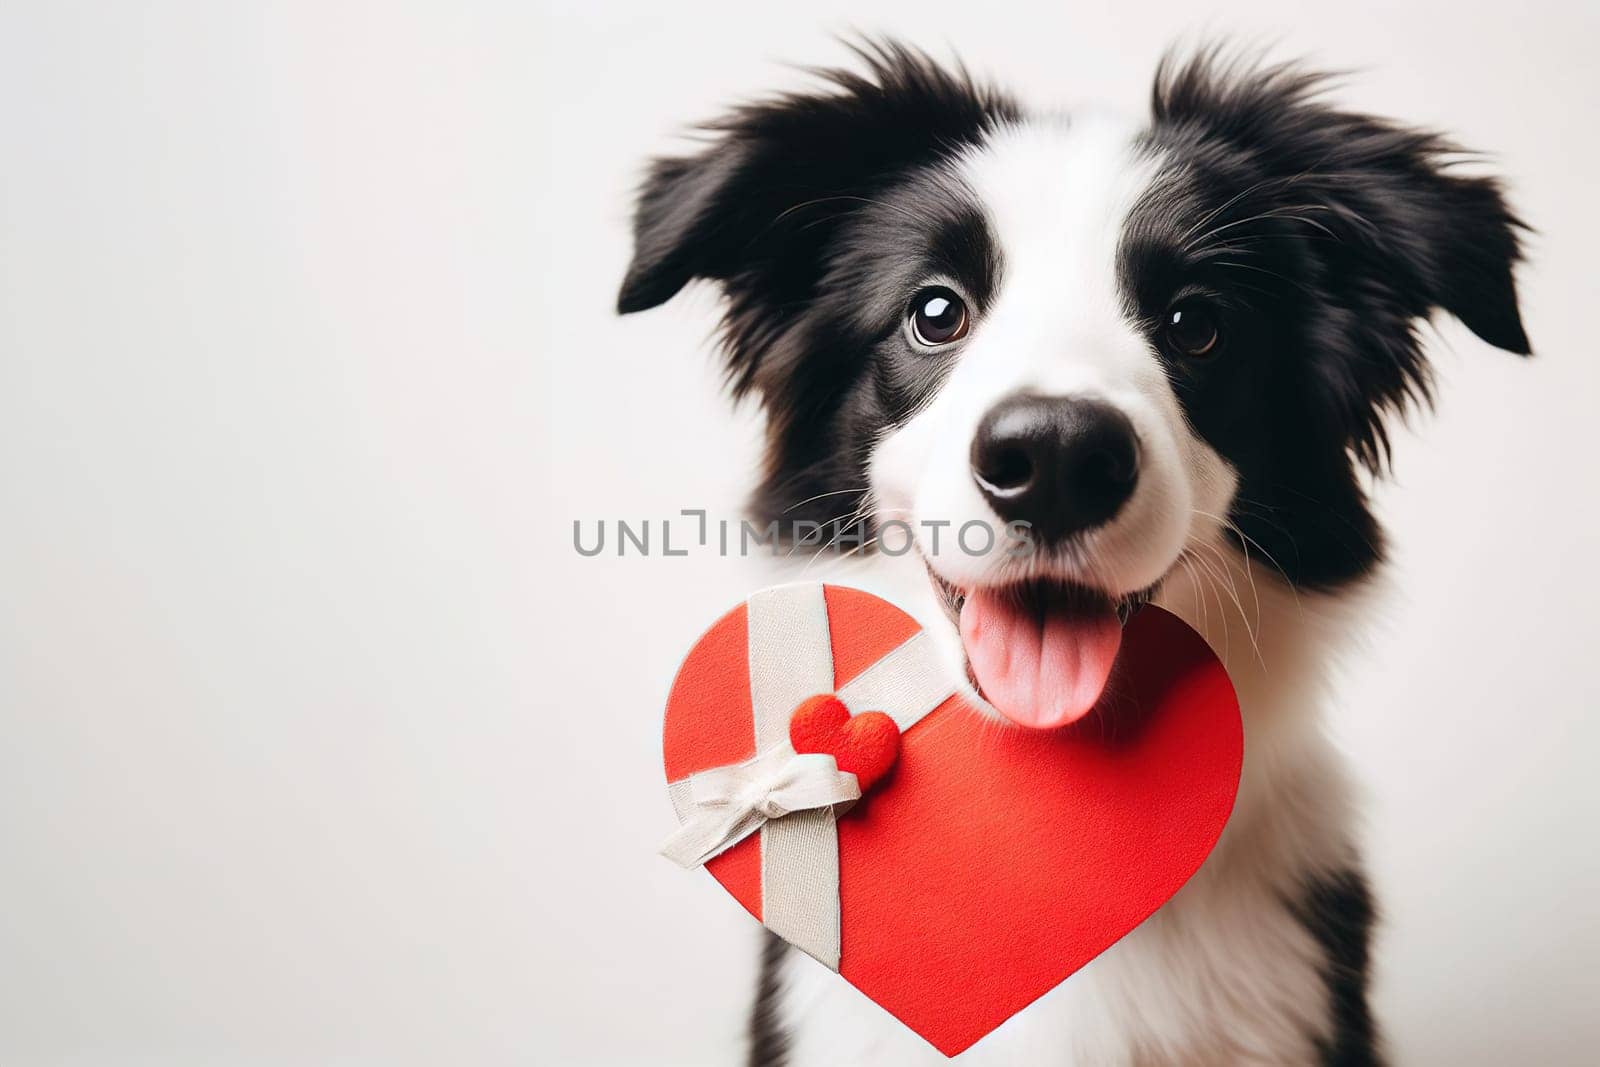 Cute portrait dog sitting and looking at camera with red heart in its mouth, isolated on a white background, concept for holidays and congratulations